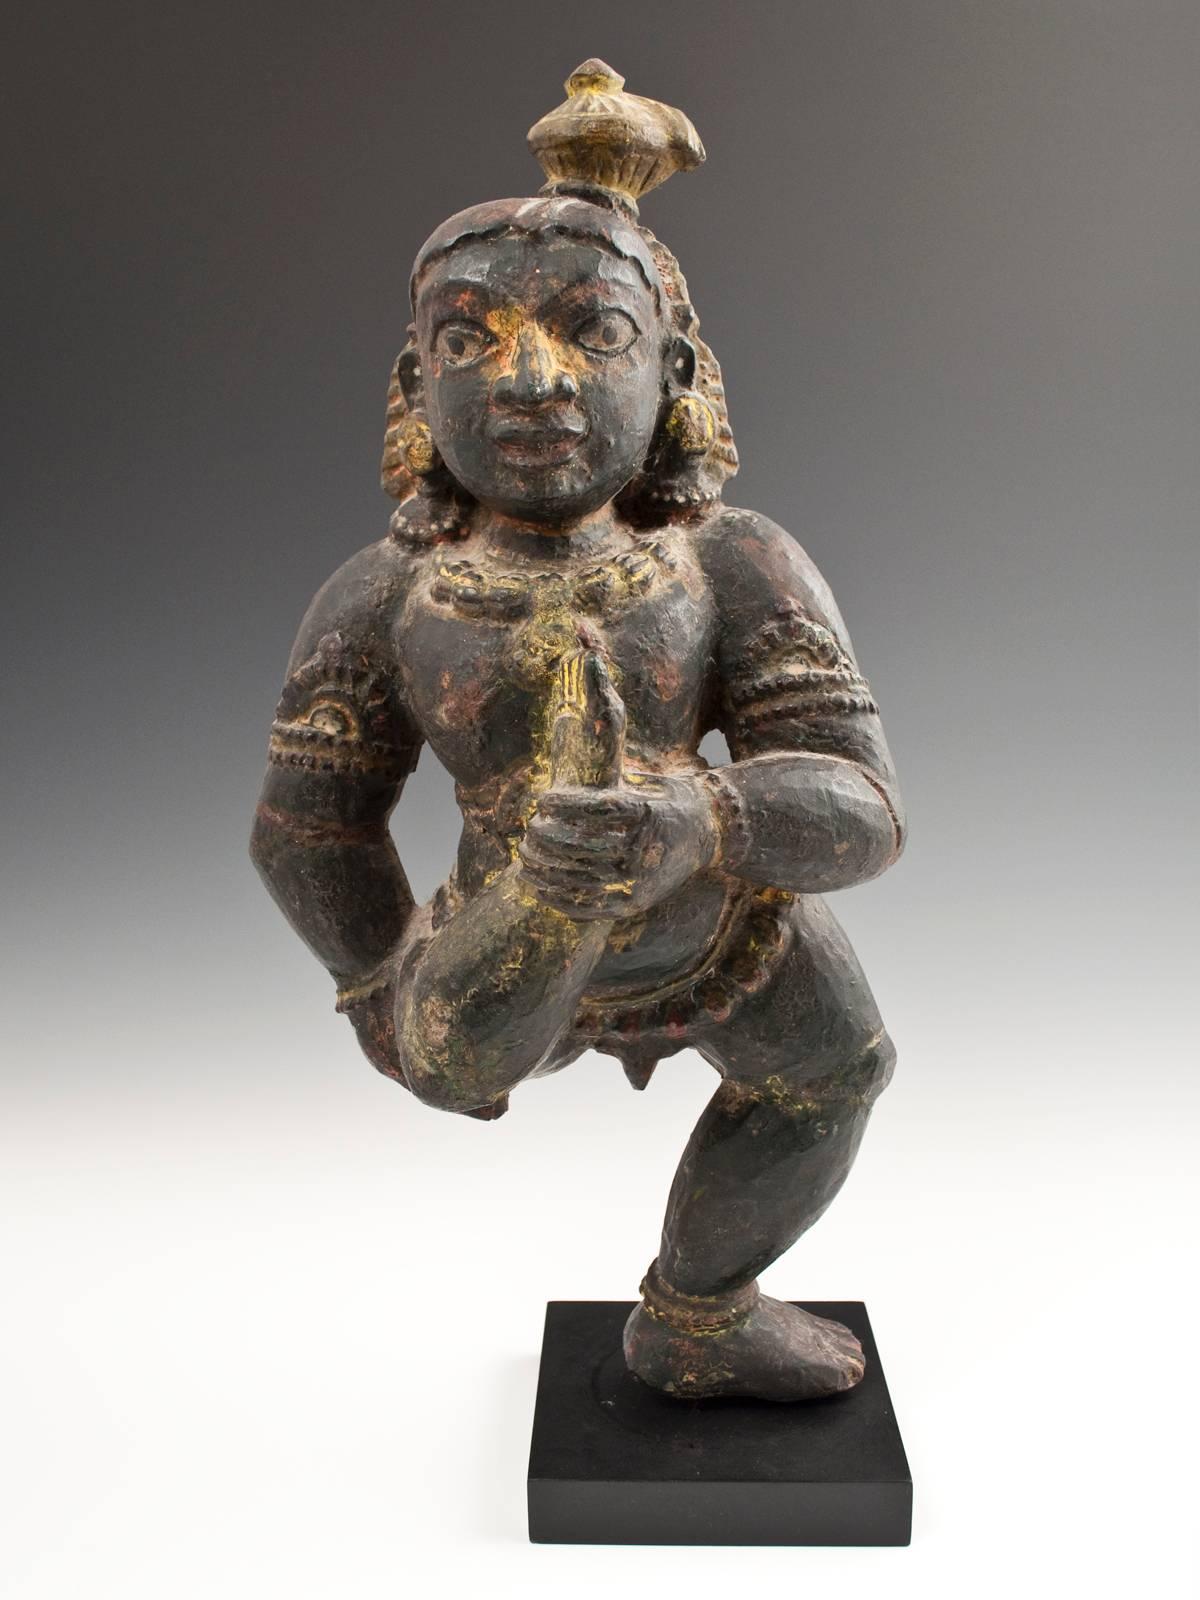 Offered by Zena Kruzick.
Mid-20th century carved wood Krishna figure, India, possibly Rajasthan.
Wonderfully animated carving of Krishna holding his right foot in front of his torso, likely a yoga asana. Remnants of yellow puja offering can be